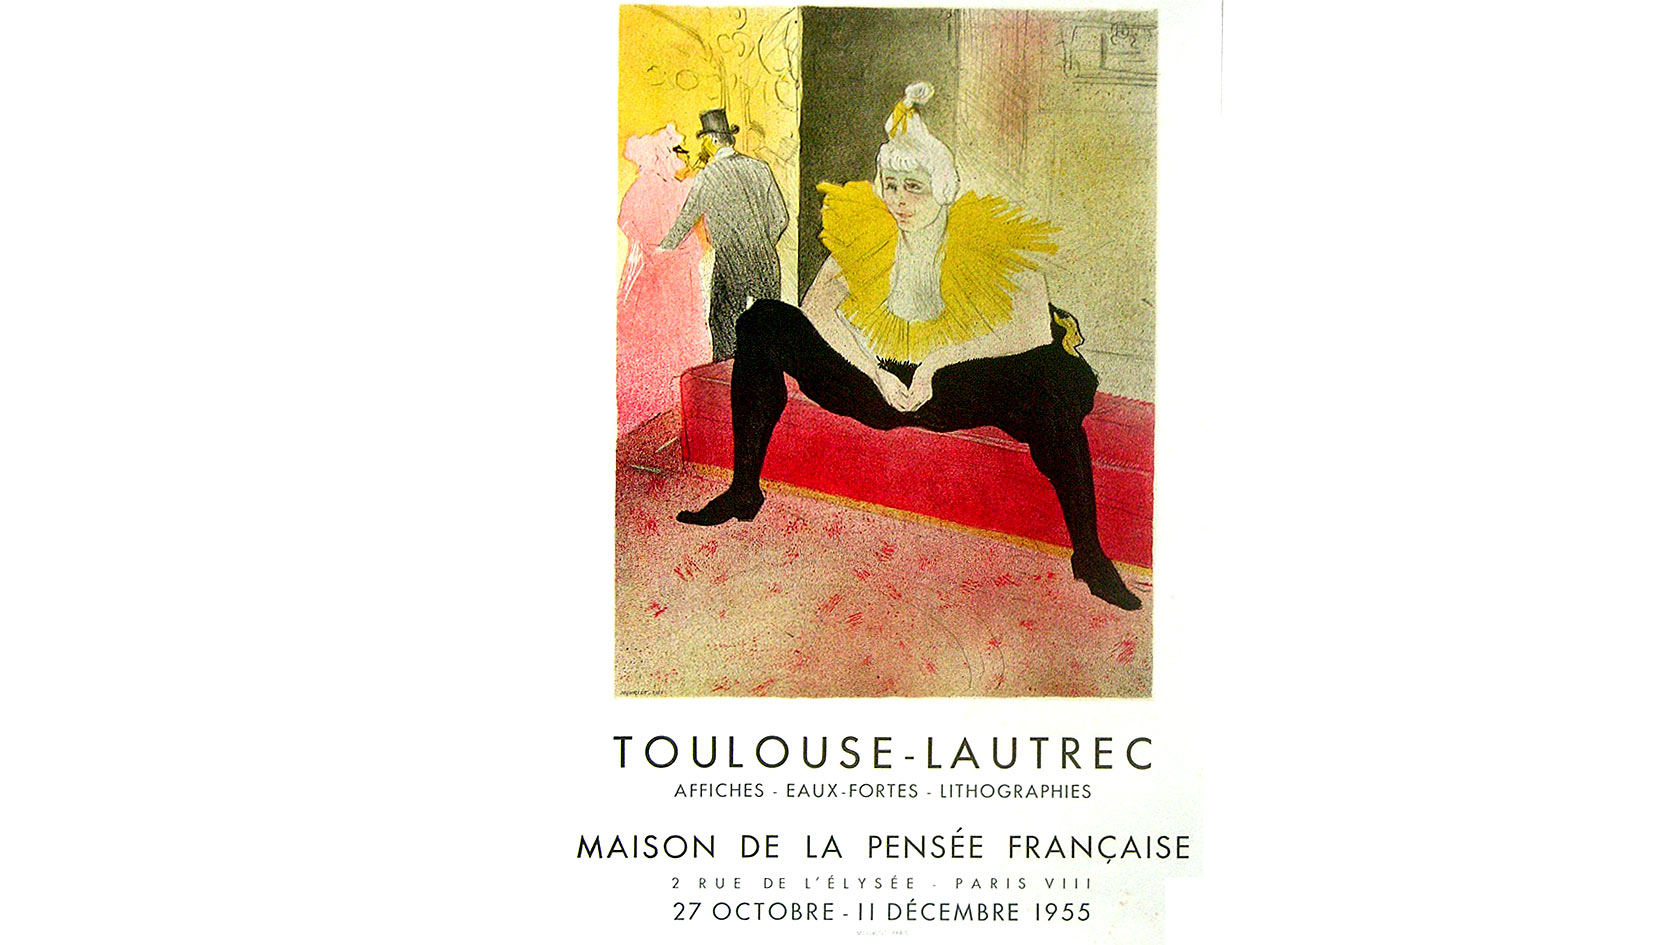 Henri de Toulouse - Lautrec - Mademoiselle Cha-U-Kao, House of French thought 